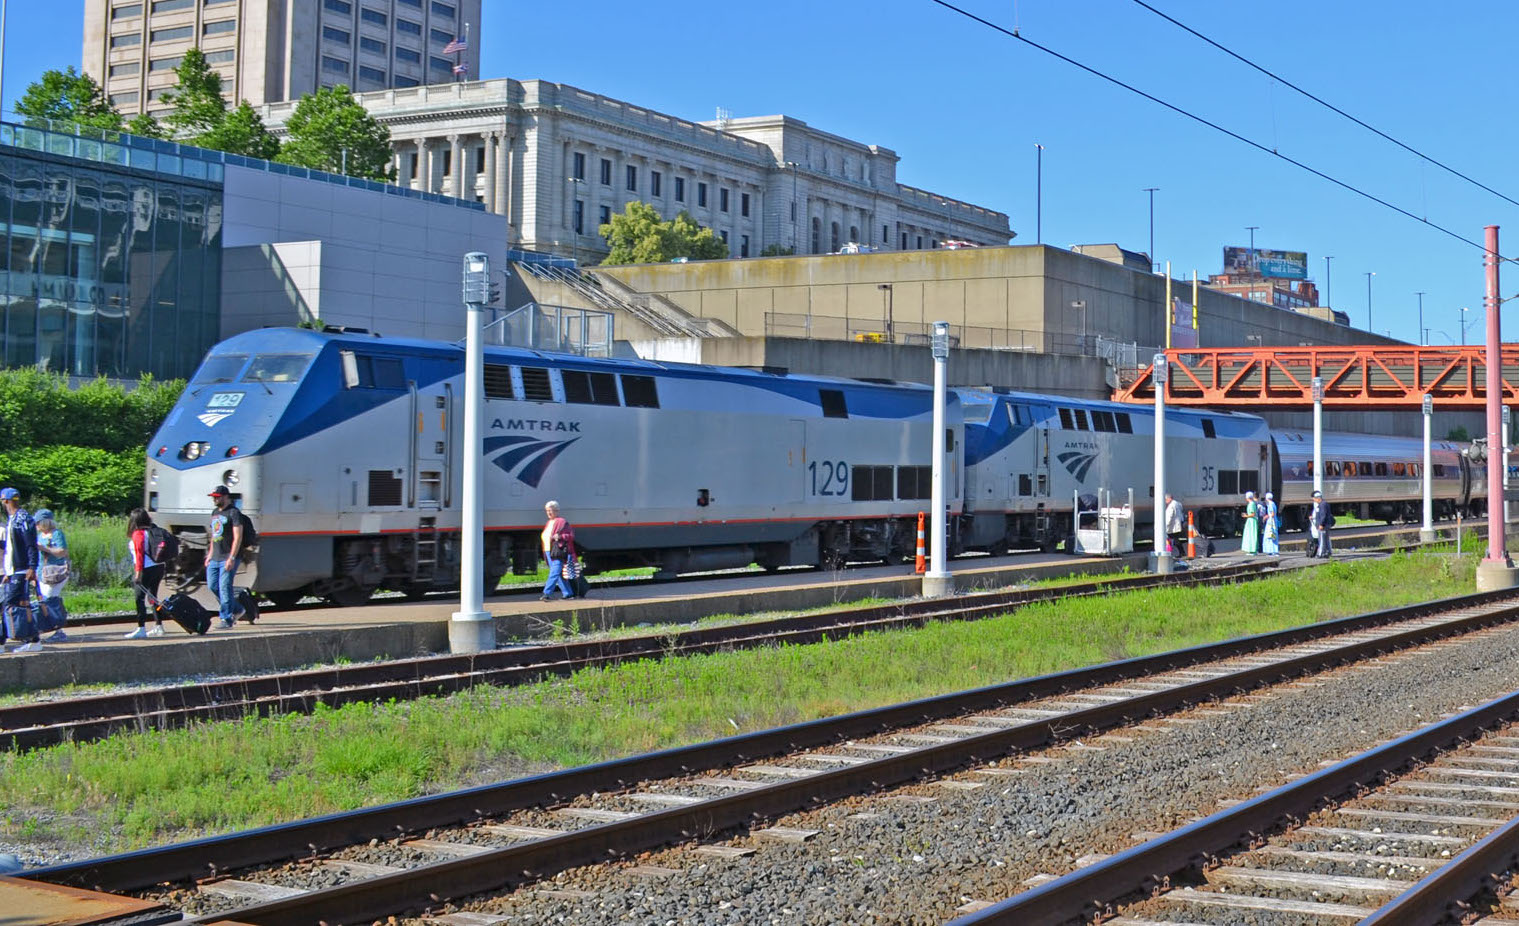 Amtrak’s Ohio expansion plans should begin with more Lake Shore Limited departures